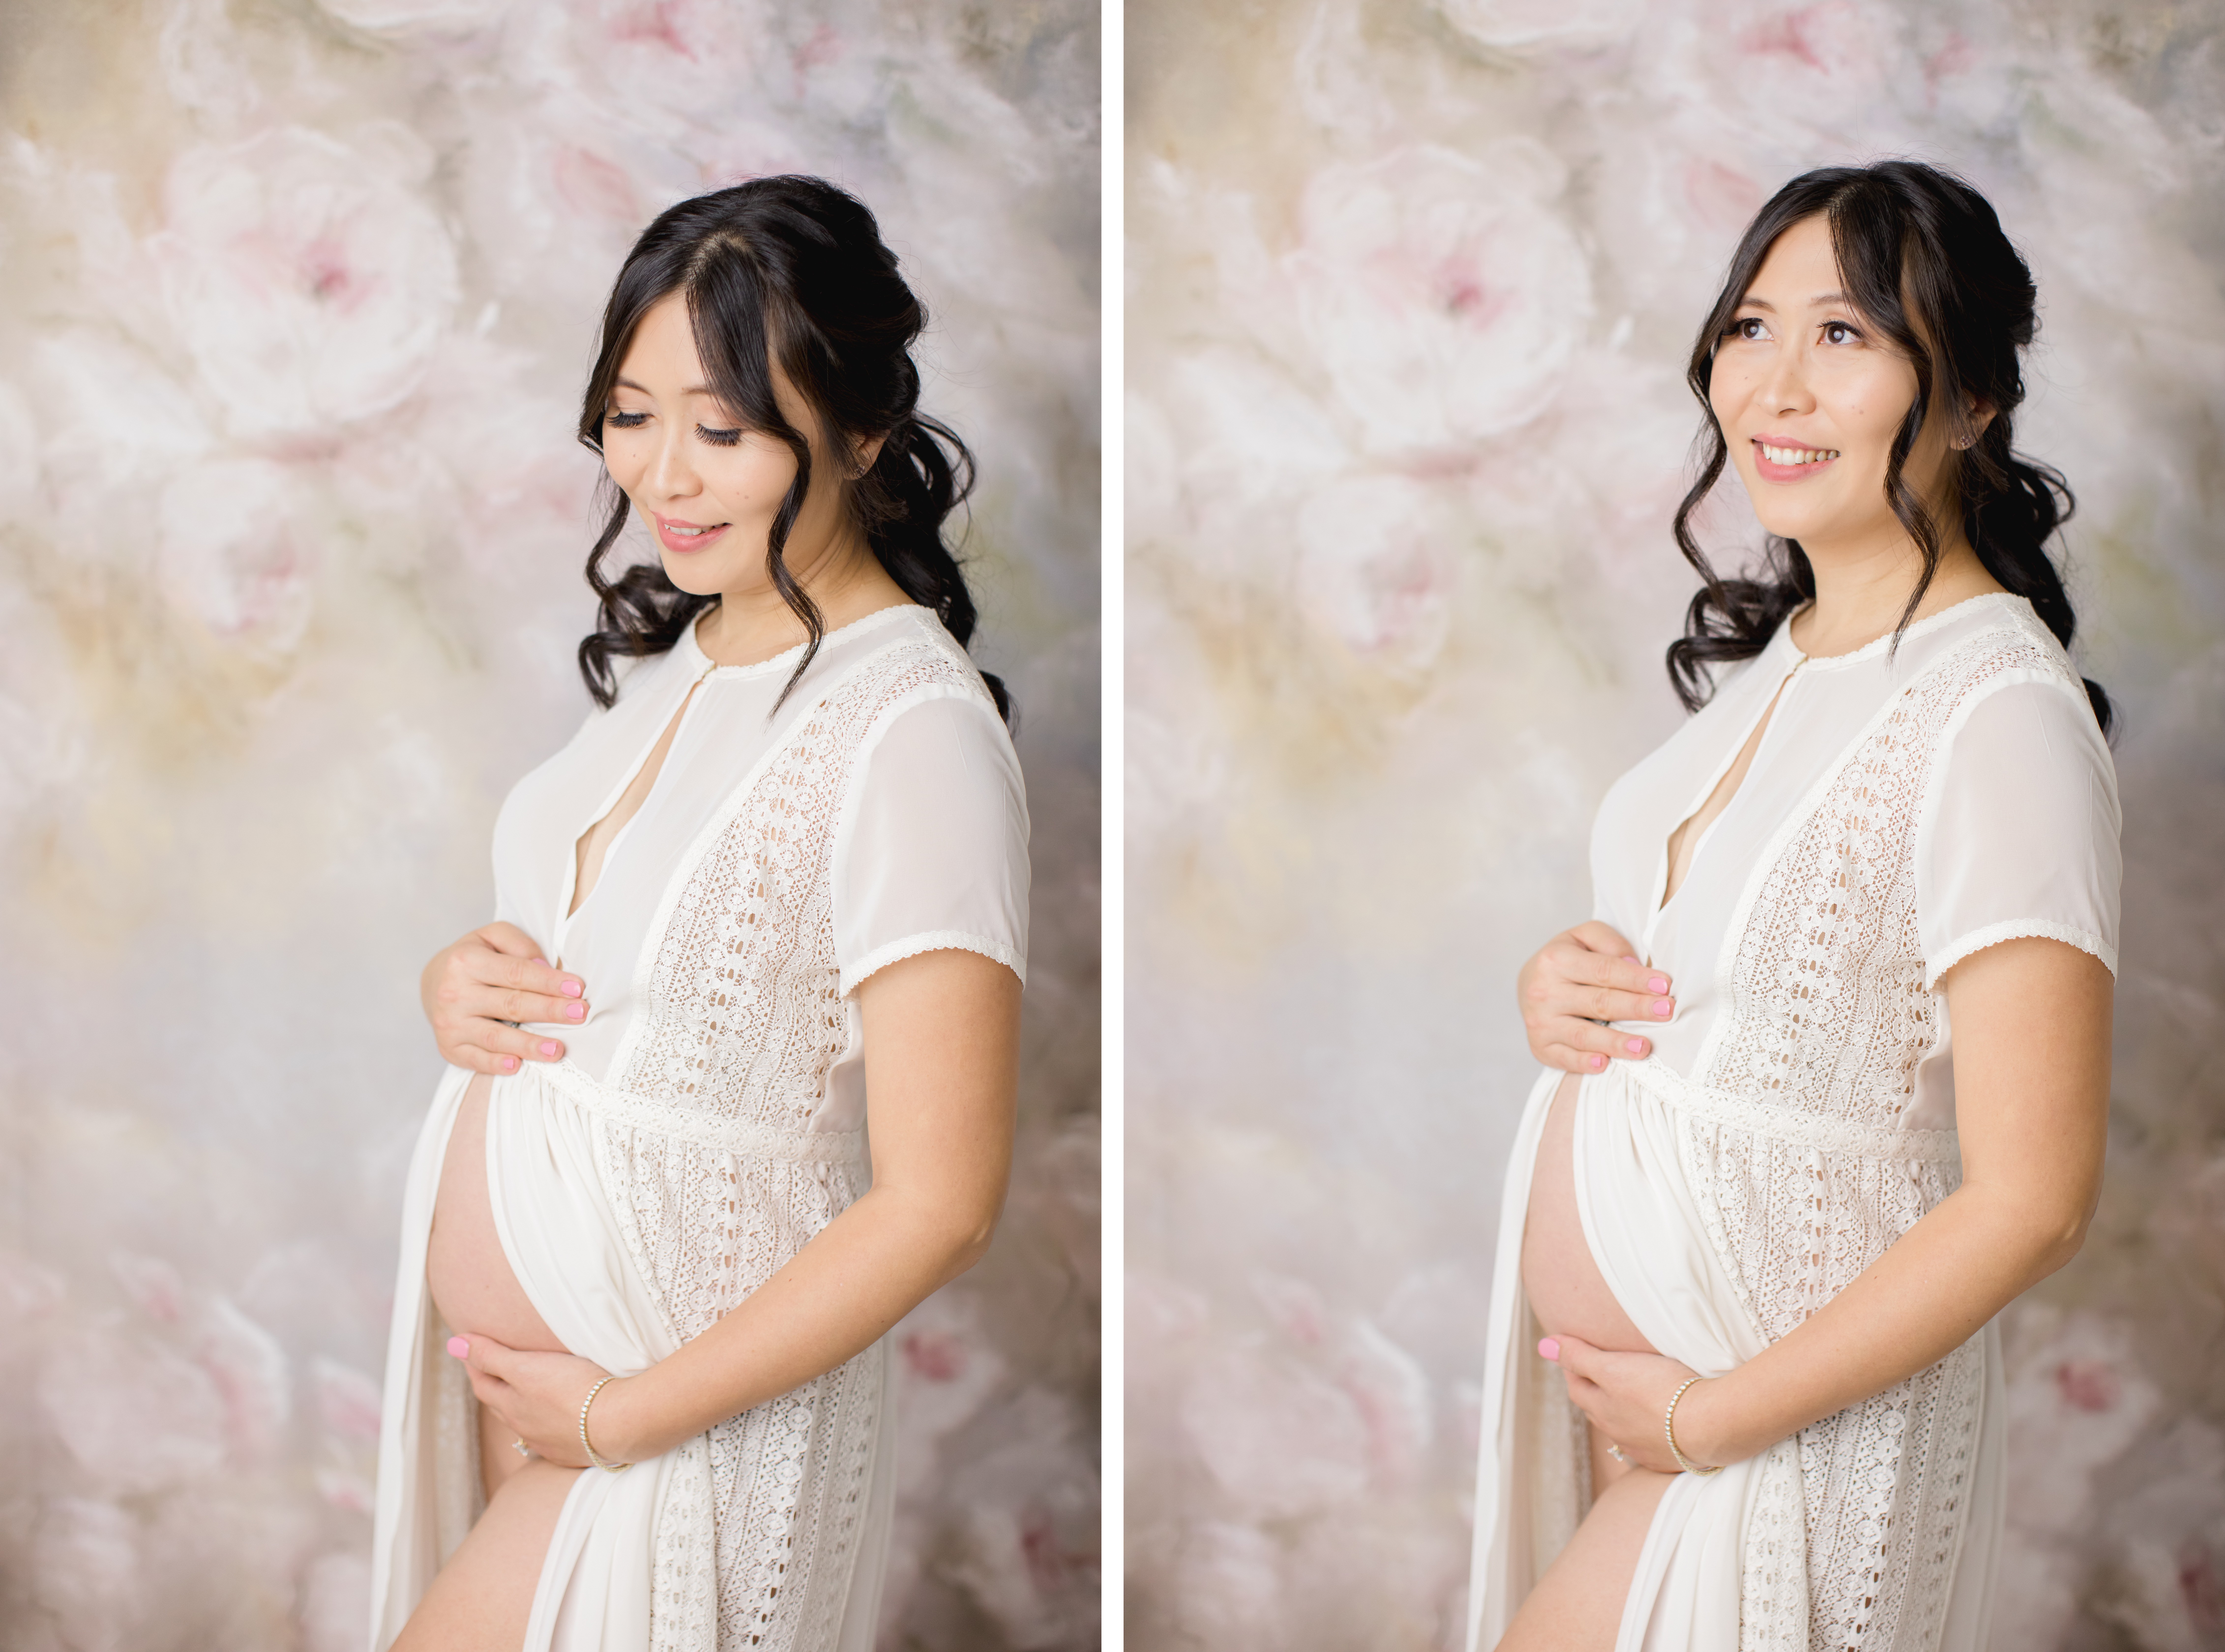 Intimate maternity portraits on floral background in reno sparks portrait studio.